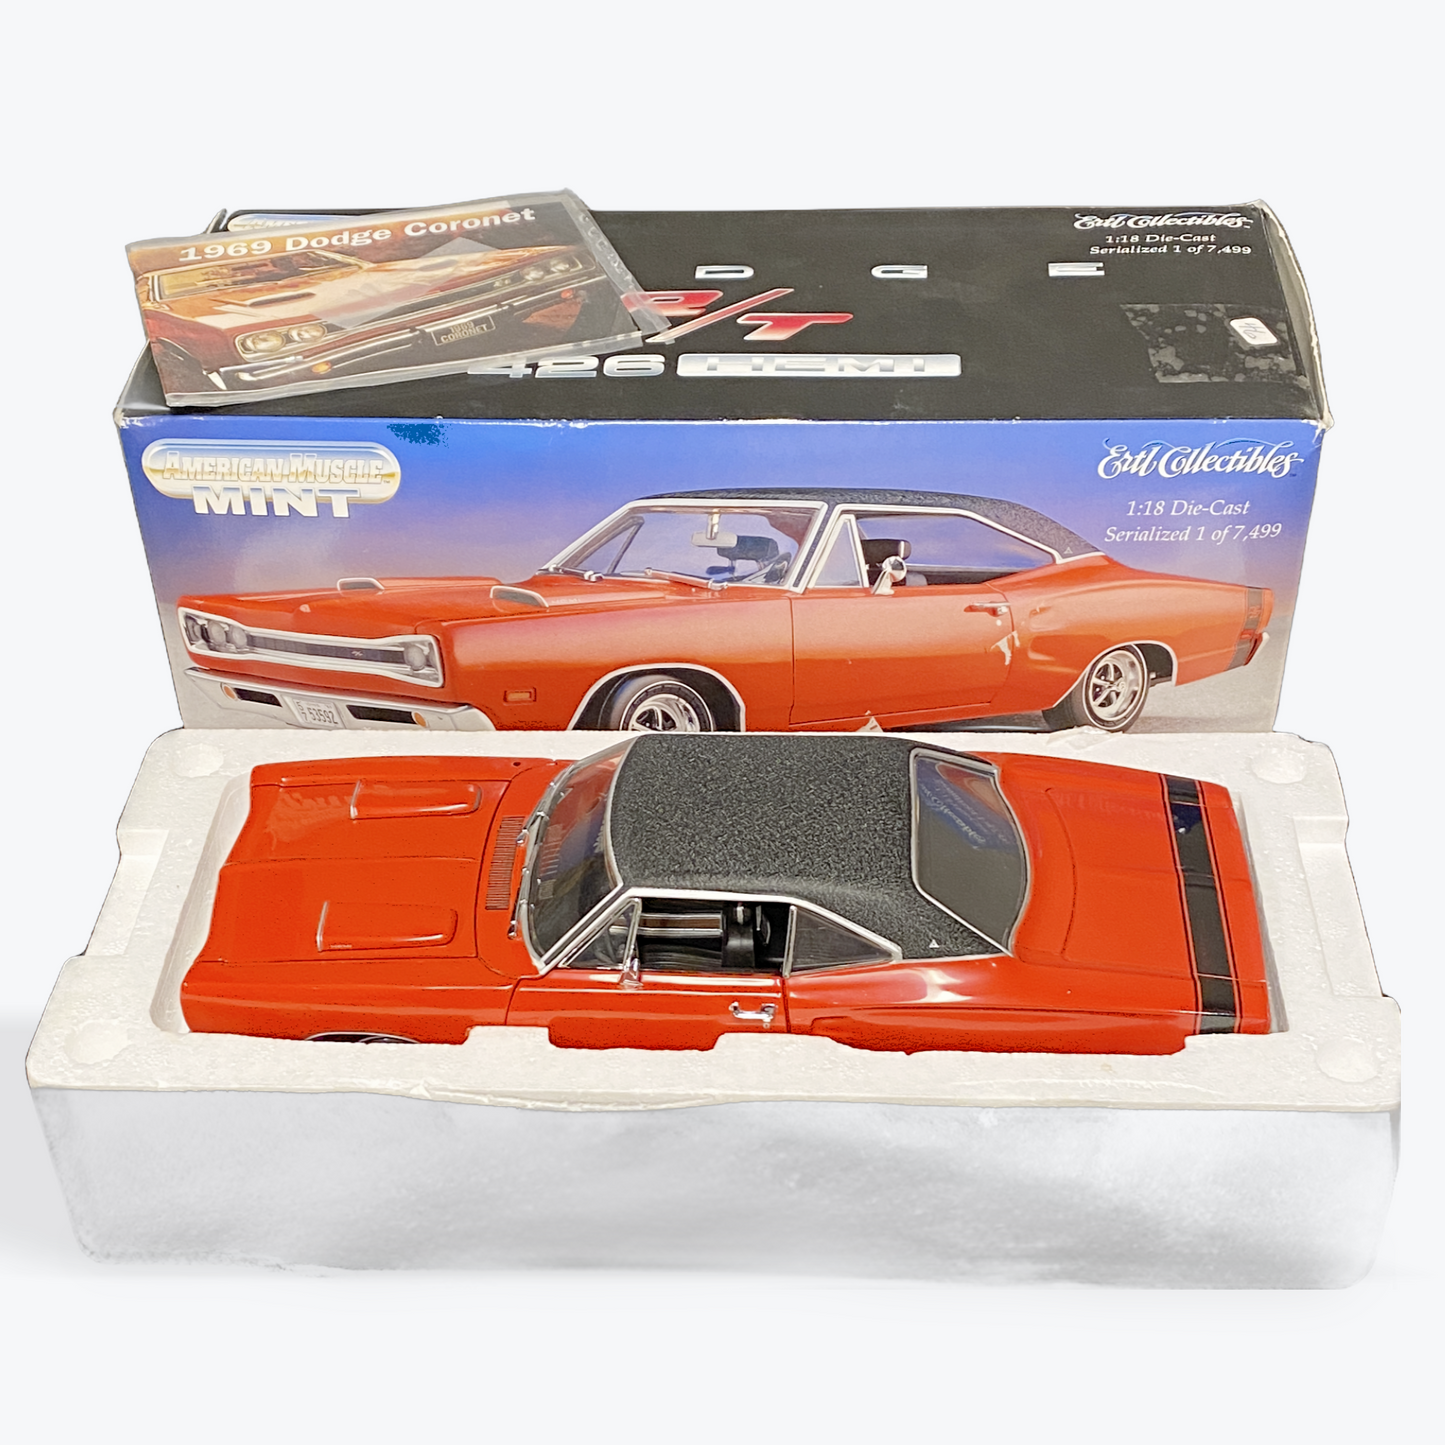 1/18 Scale American Muscle 1969 Dodge Coronet R/T - Mint Series/Hemi/Black Vinyl Top - Performance Red - Ertl Collectibles